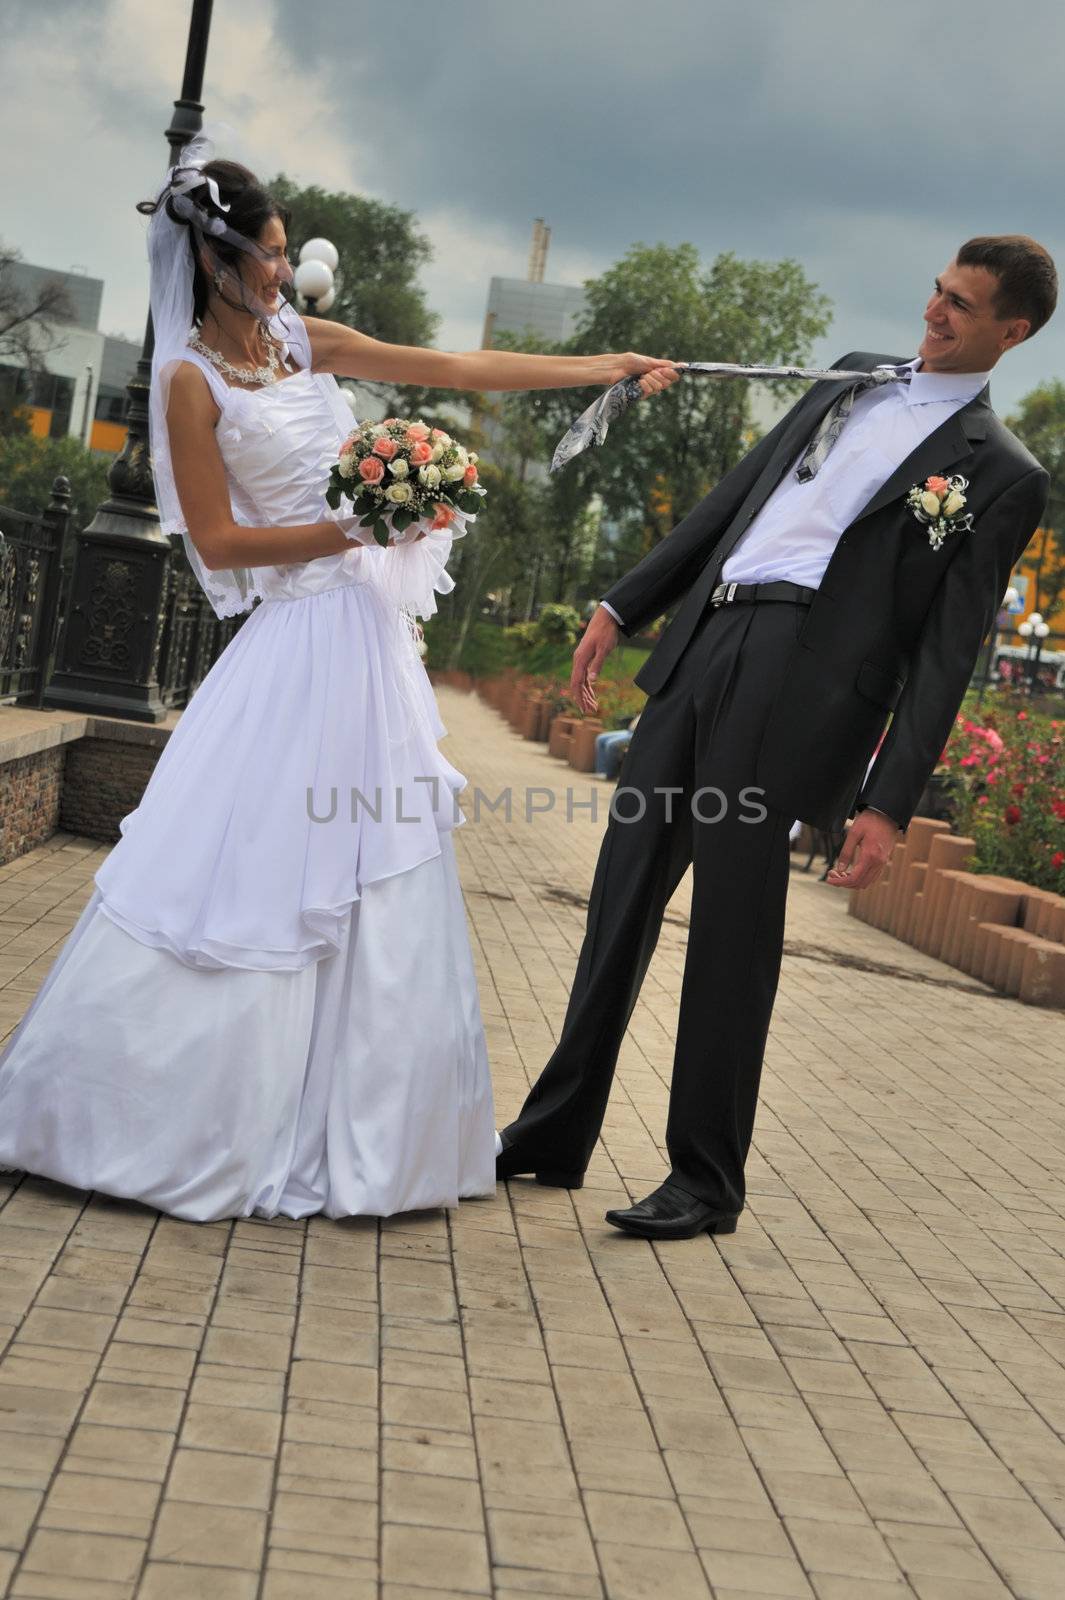 The bride pulls the groom for a tie by galdzer